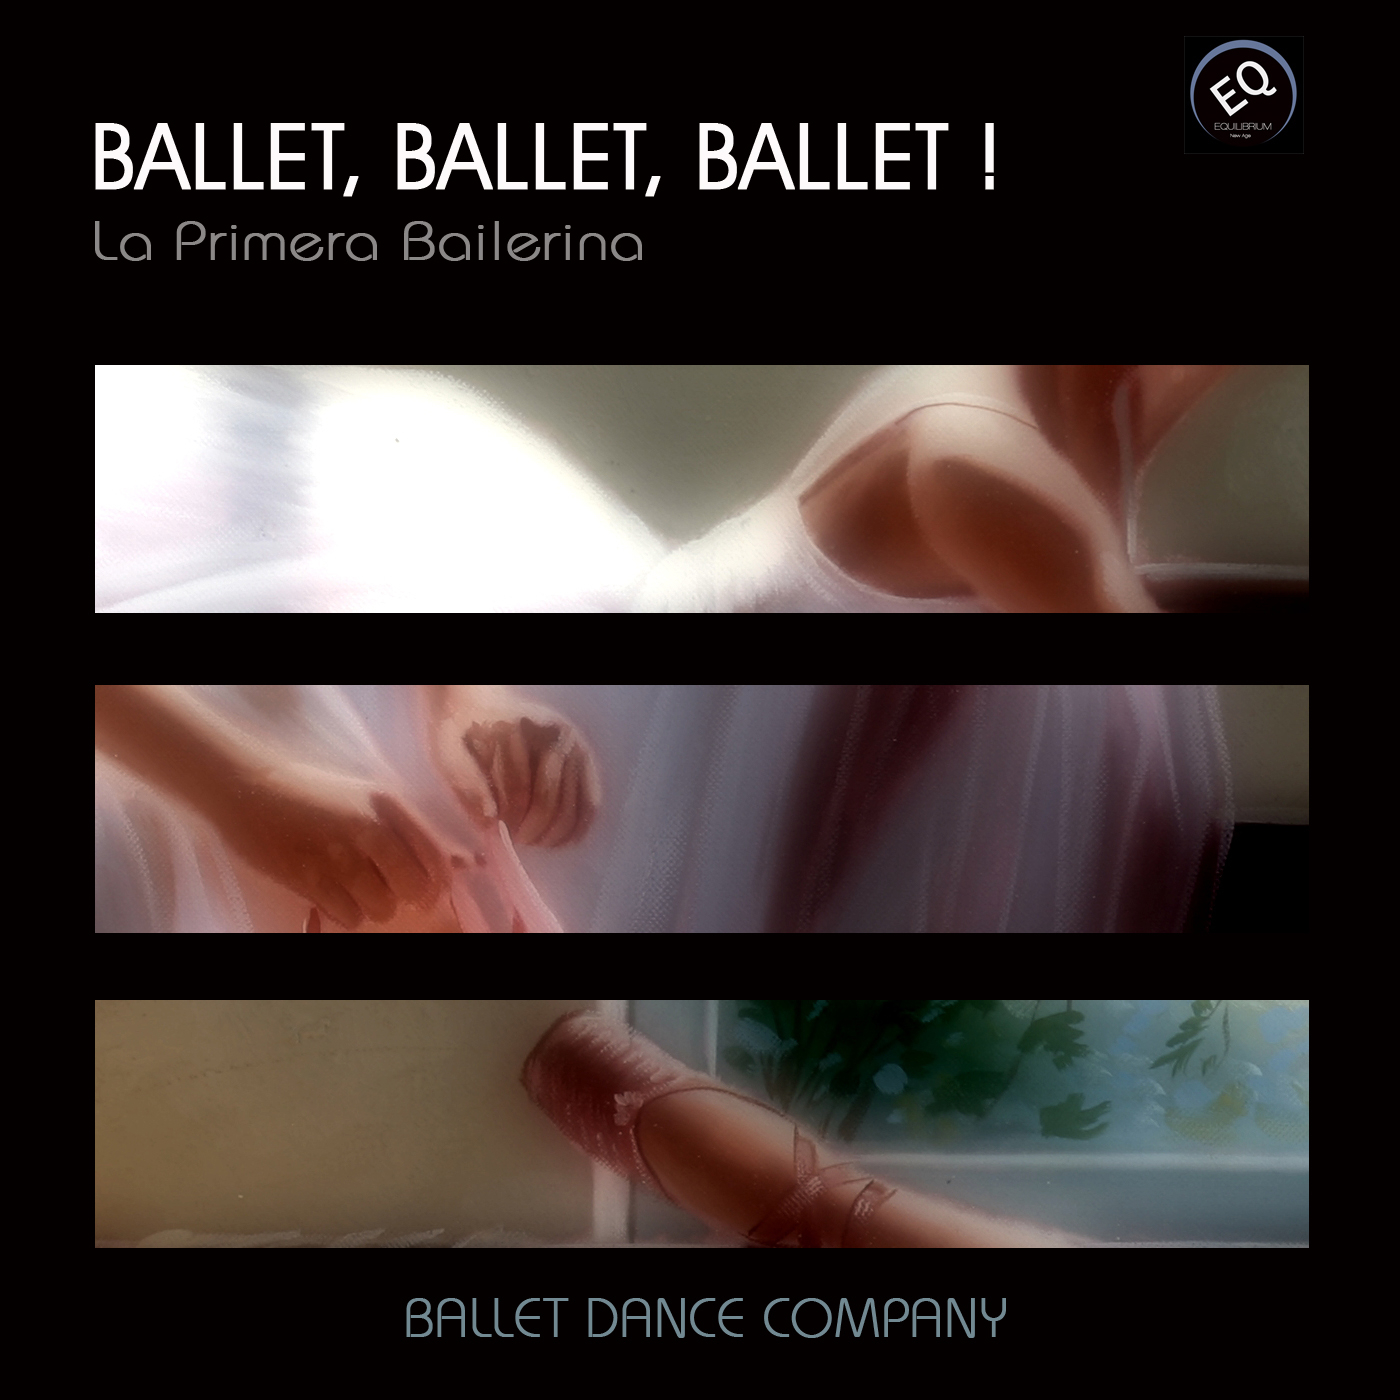 Detente - Piano Adagio for Ballet - Musical Preparation Given for This Track